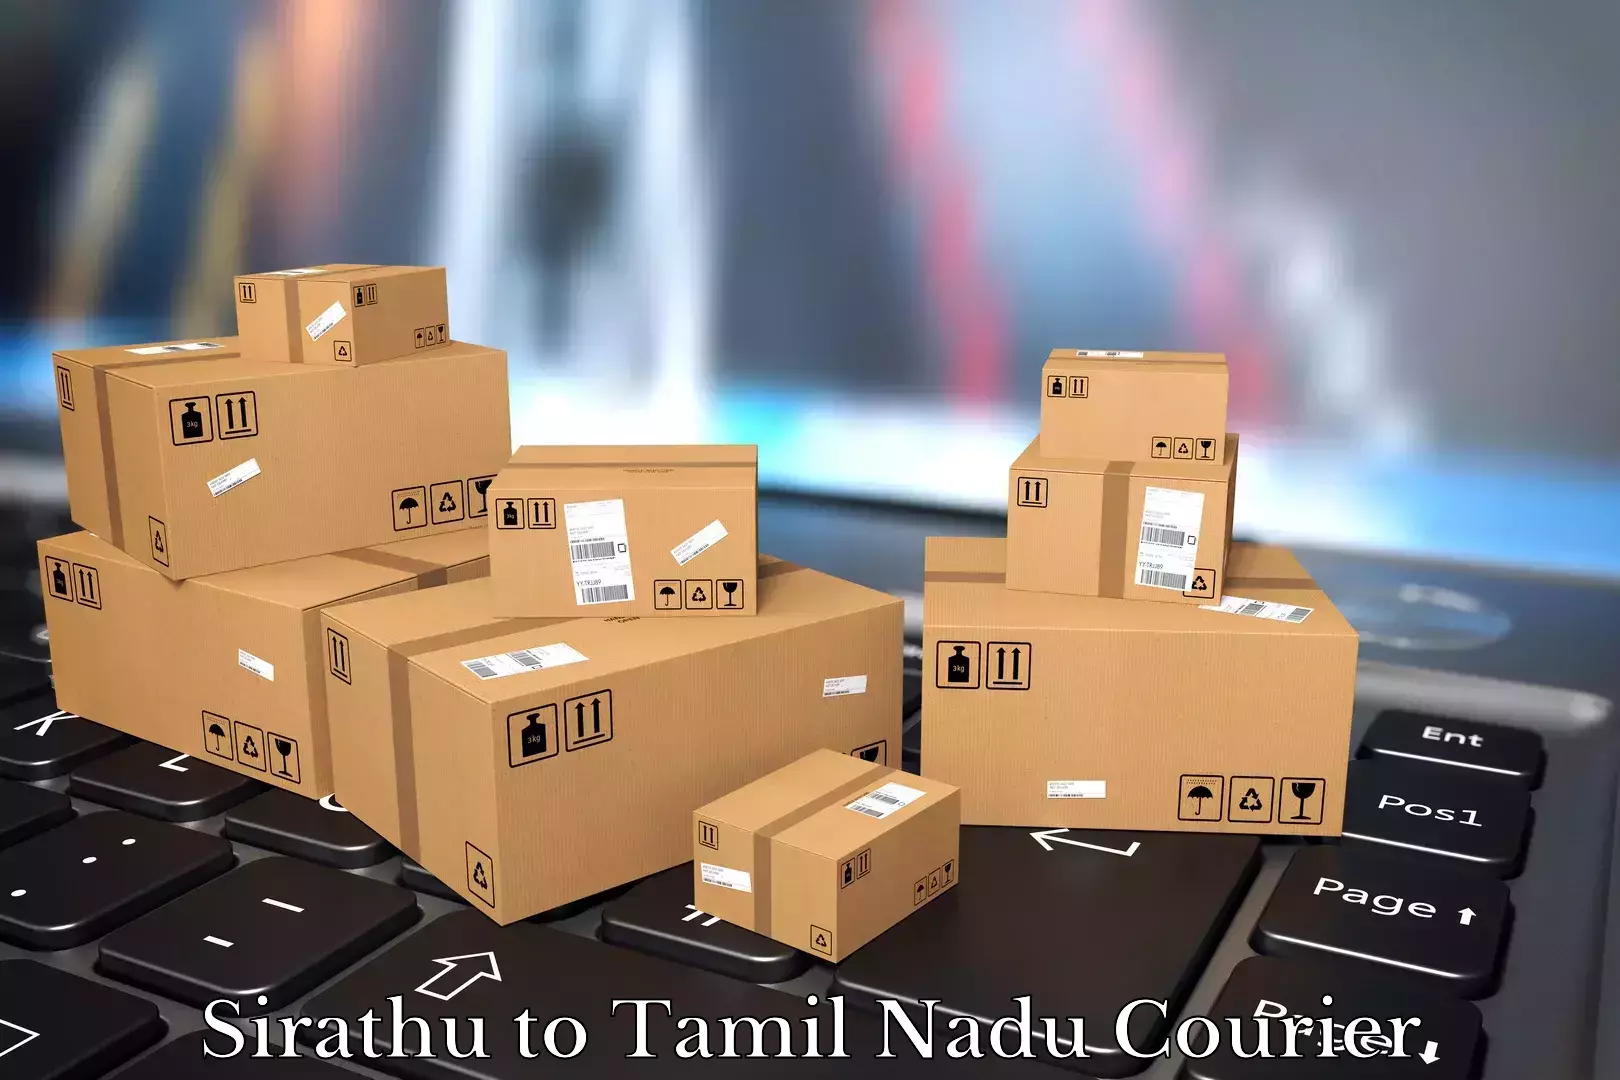 Moving and packing experts Sirathu to Tamil Nadu